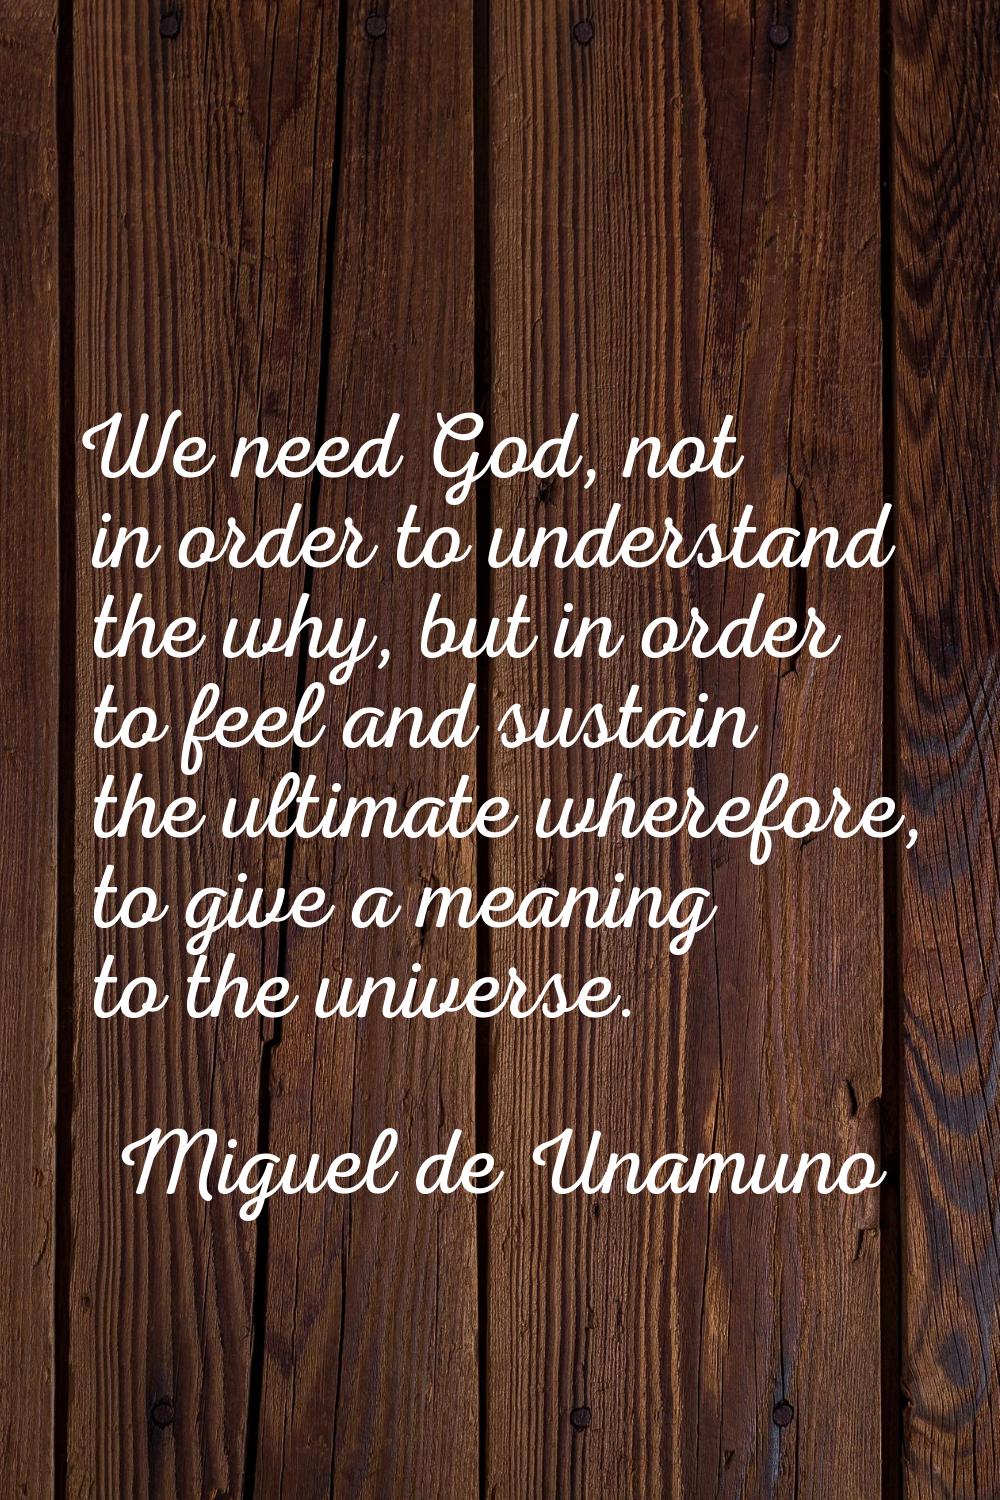 We need God, not in order to understand the why, but in order to feel and sustain the ultimate wher